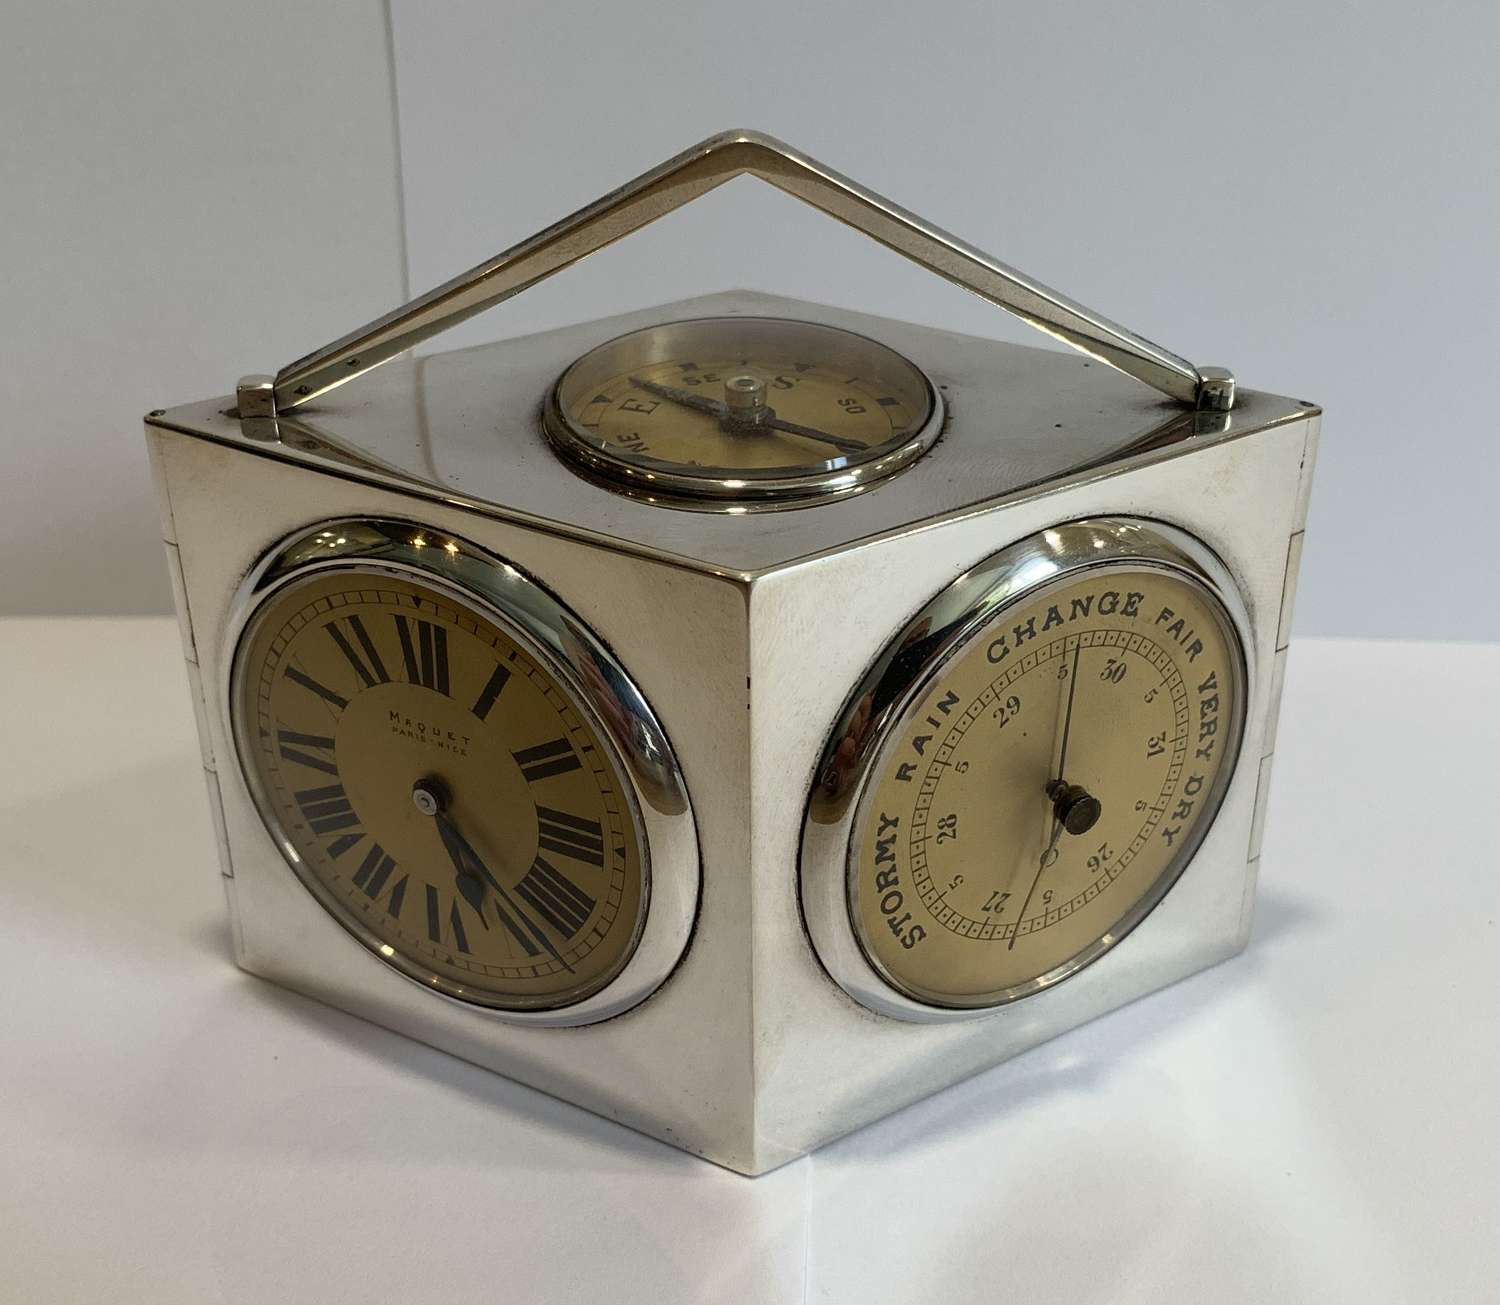 A rare silver and enamel Weather Station compendium by Maquet of Paris